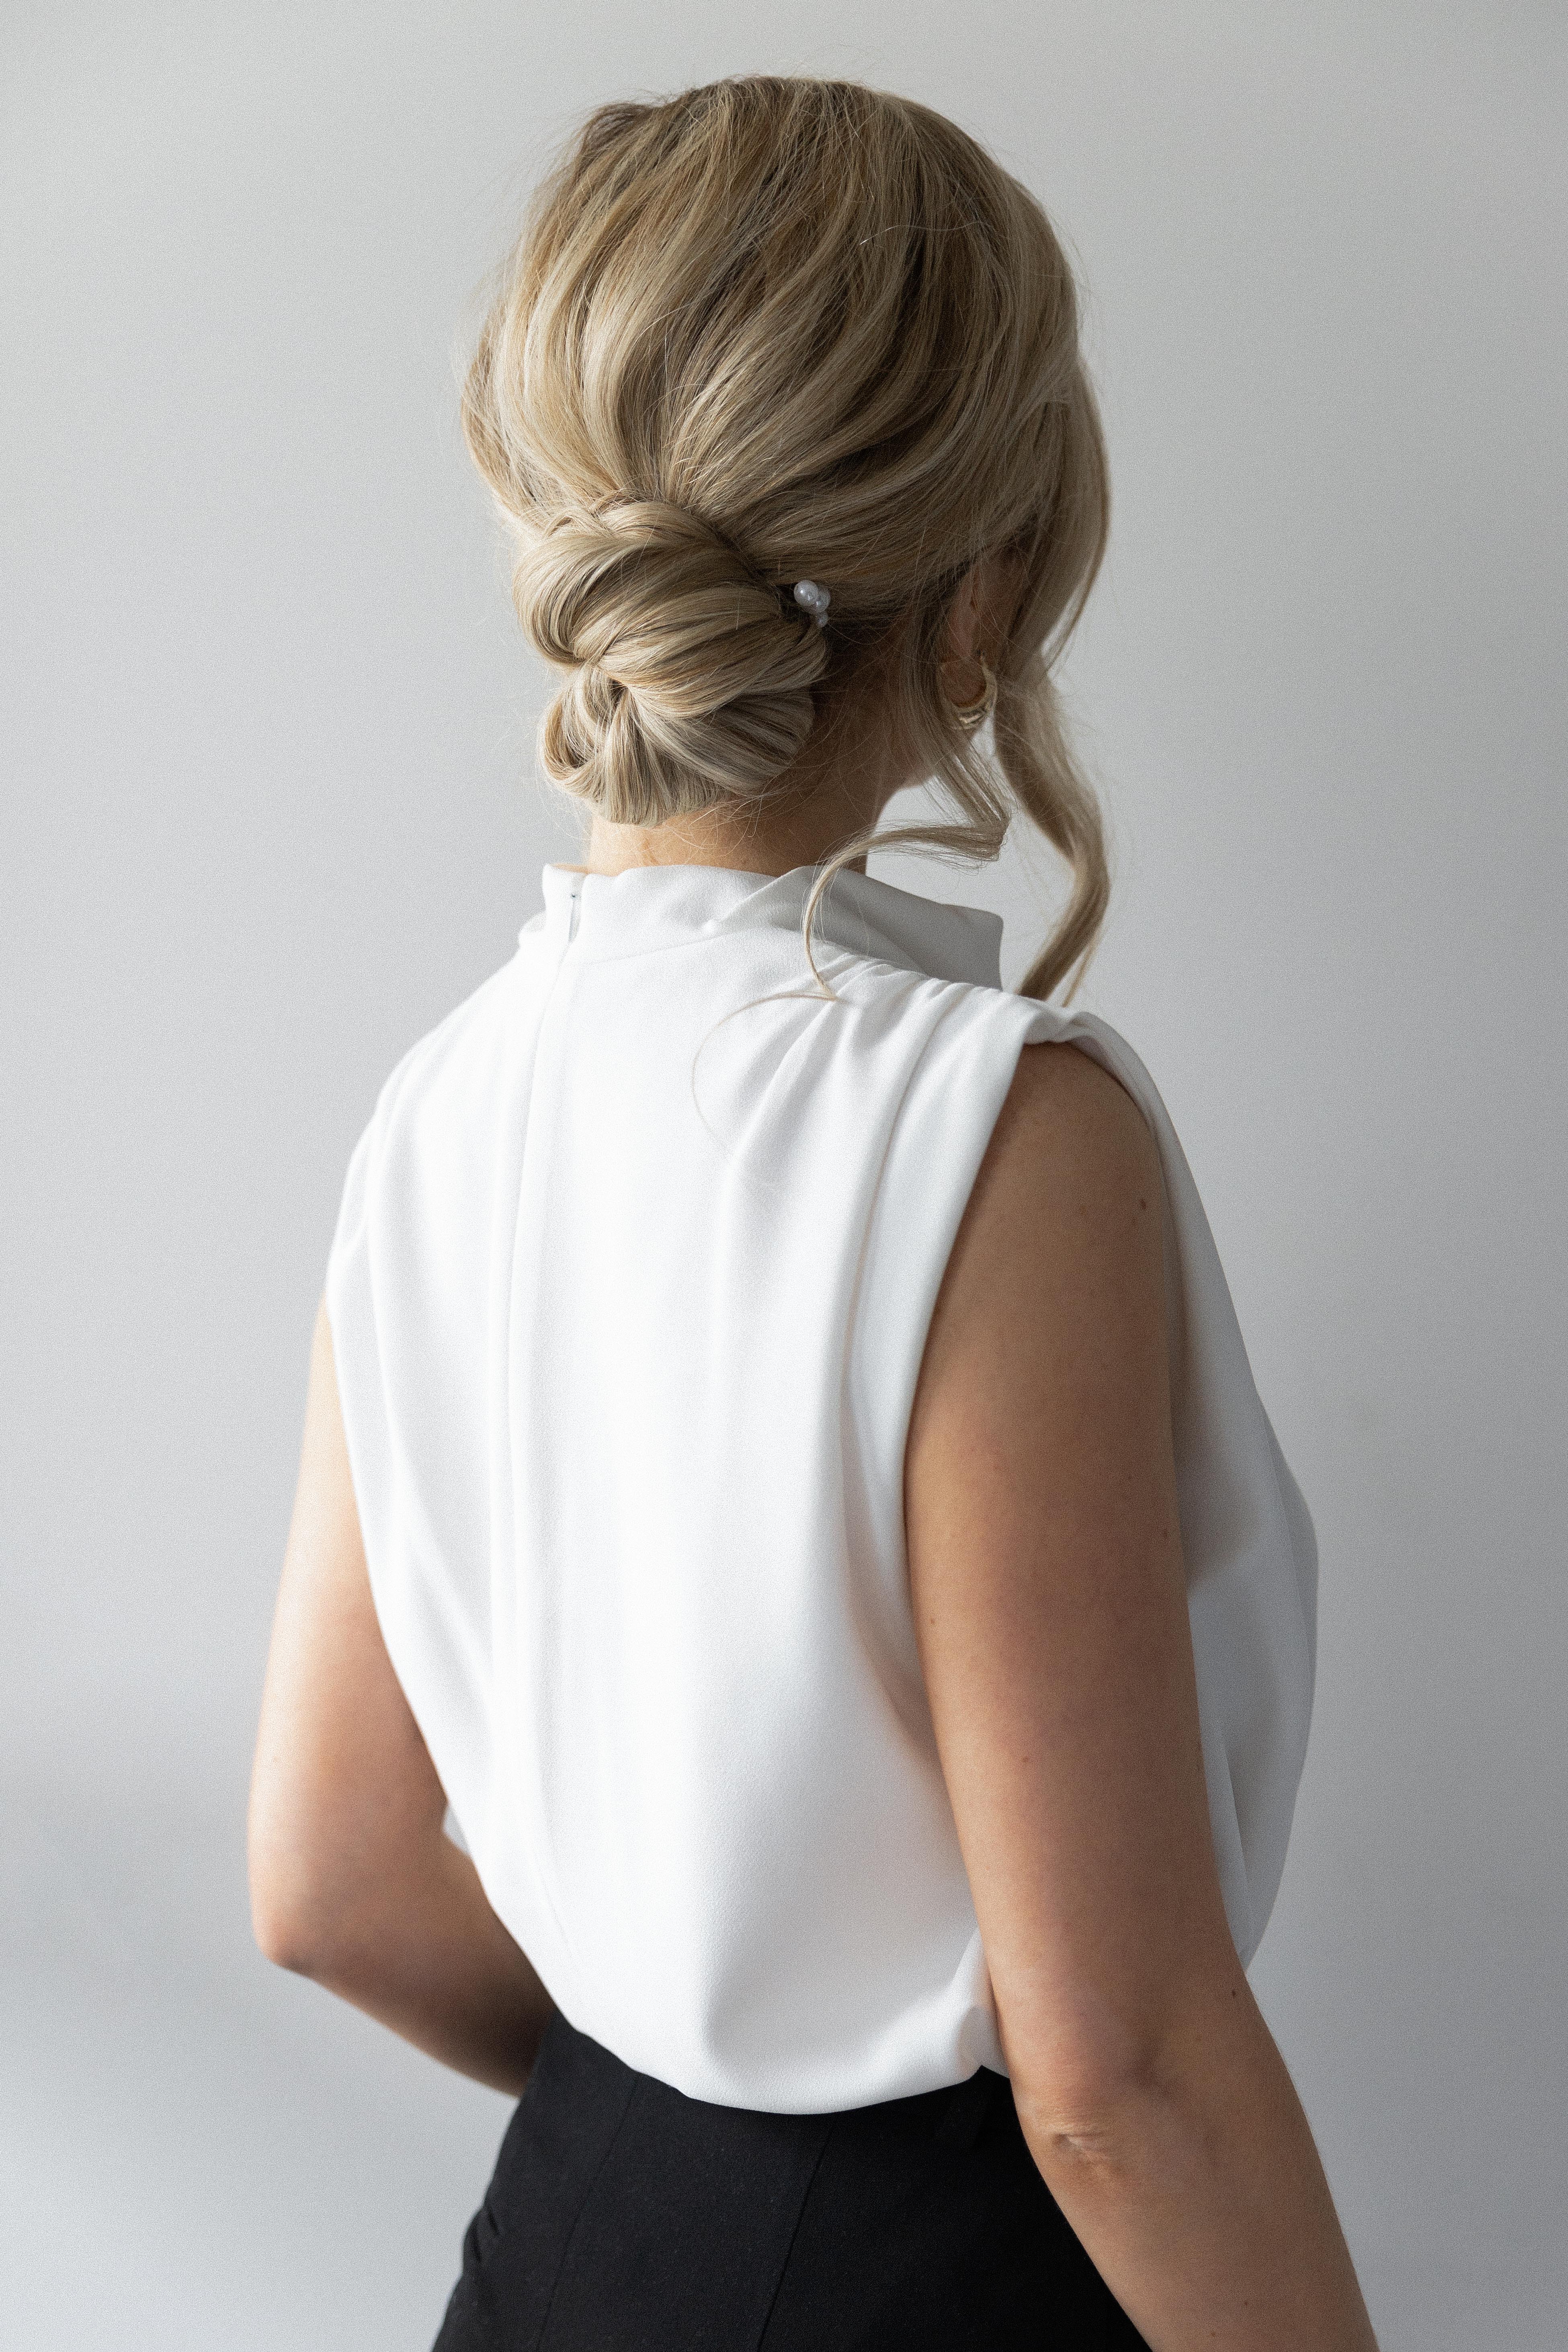 Cute & Easy Updo Hairstyle for Long & Medium Hair | www.alexgaboury.com